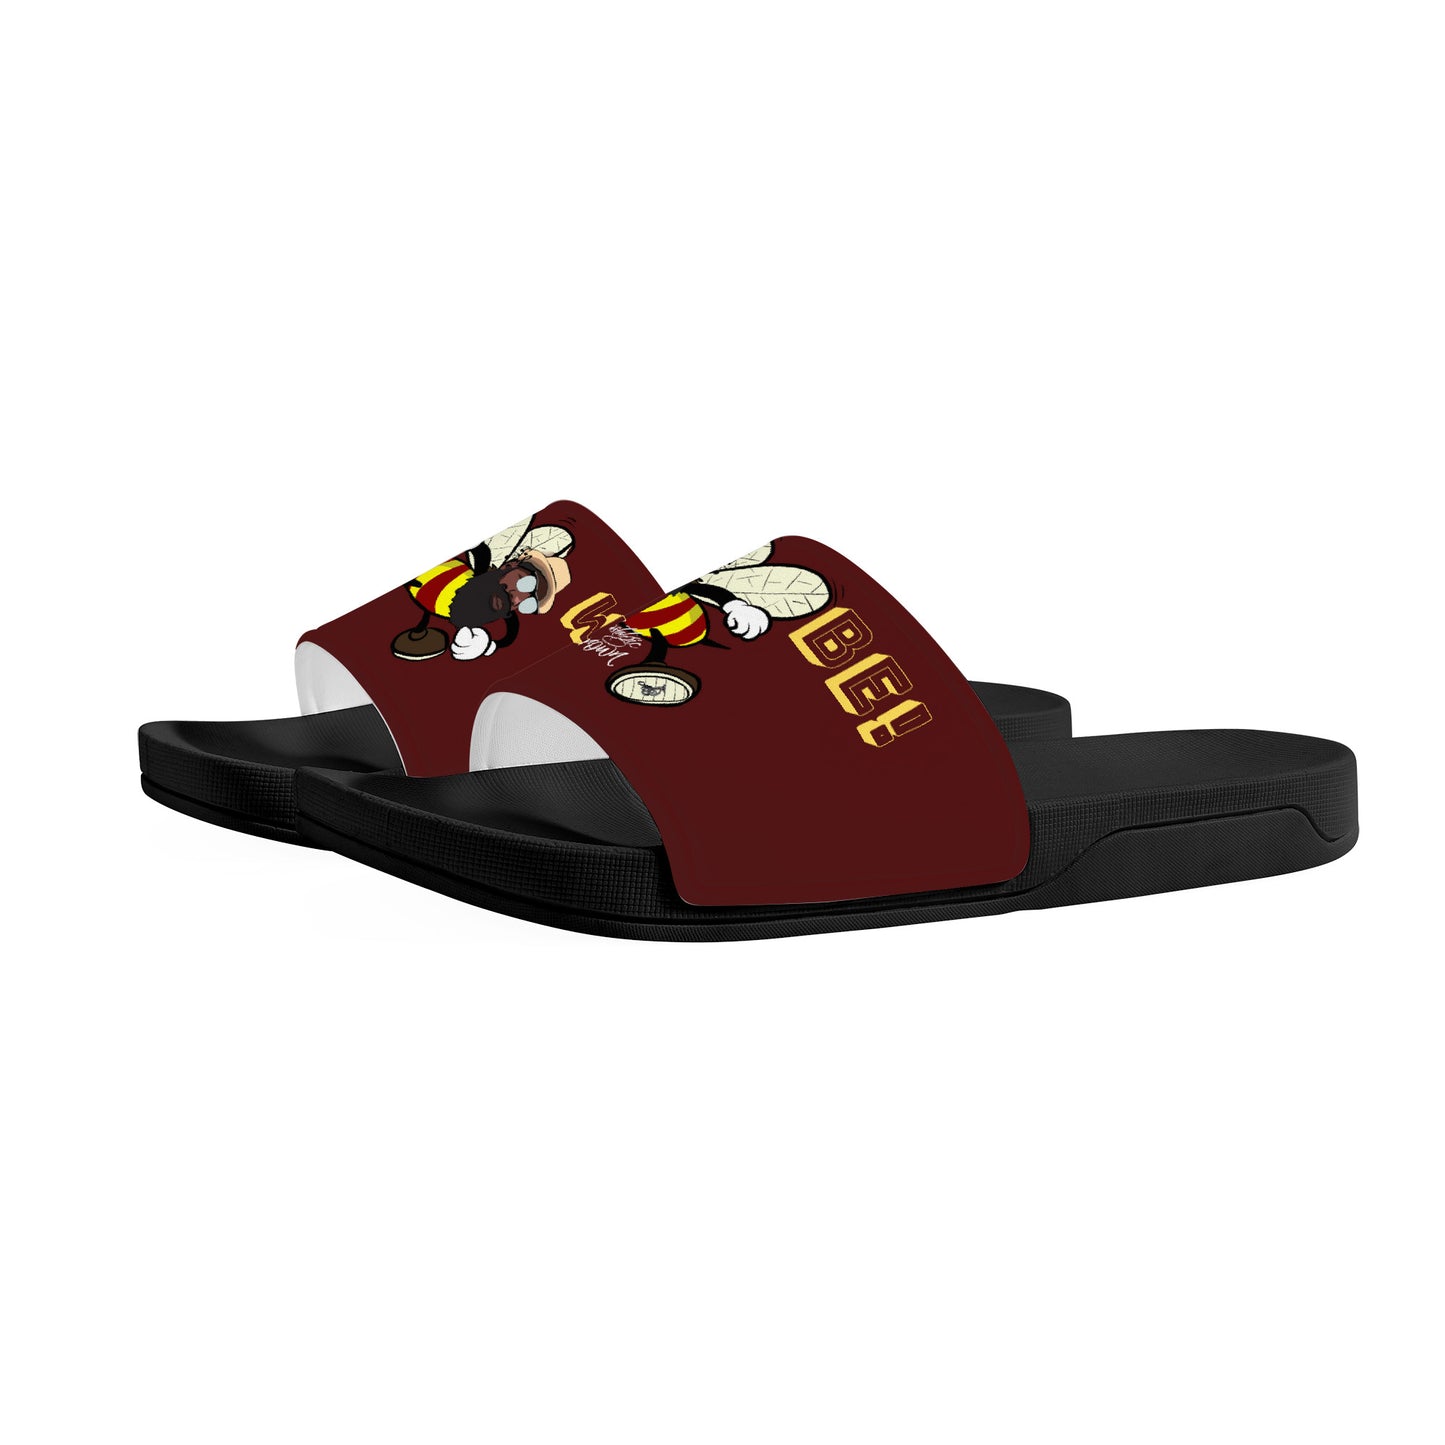 Be Who You Bee  Slide Sandals - Black